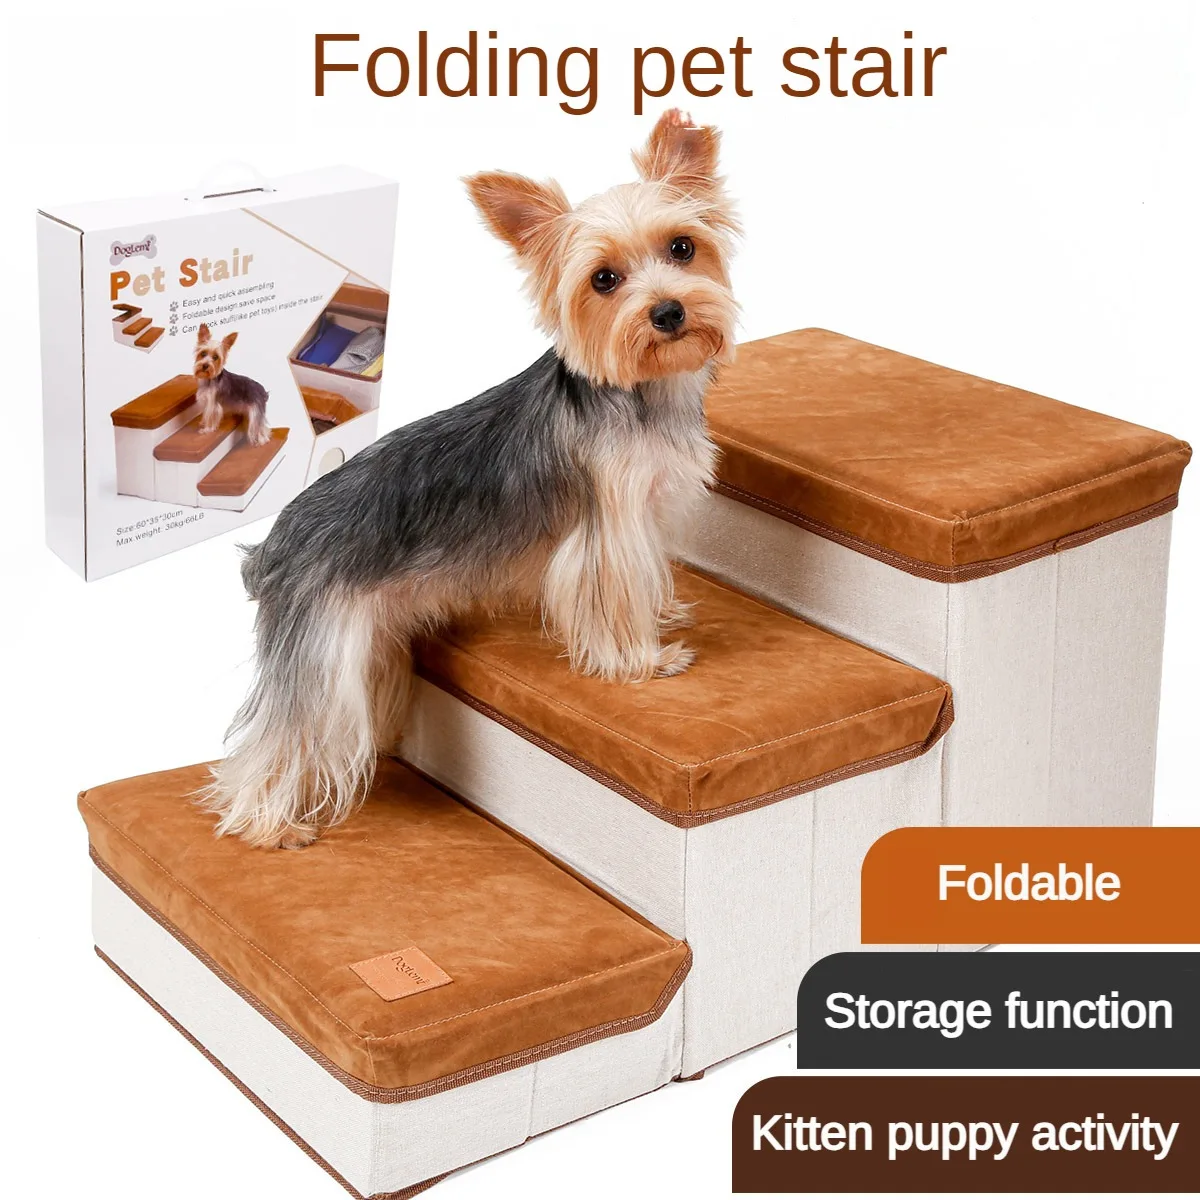 

Durable 3-Step Foldable Pet Stairs Storage Design for Indoor Use Ideal for Small Dogs and Puppies Up to 55 Pounds